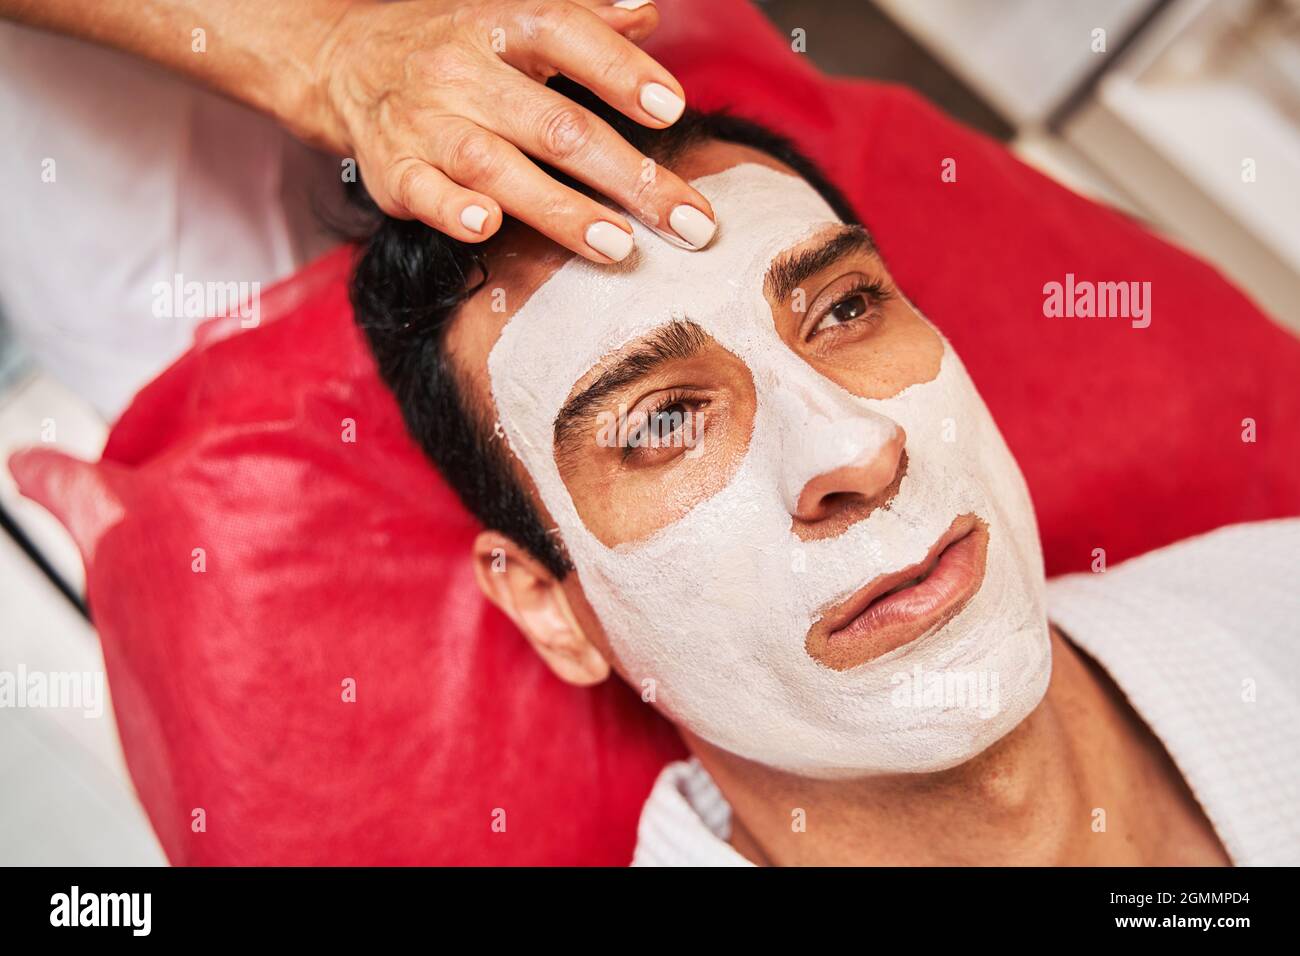 Beauty specialist applying facial pack on adult forehead Stock Photo